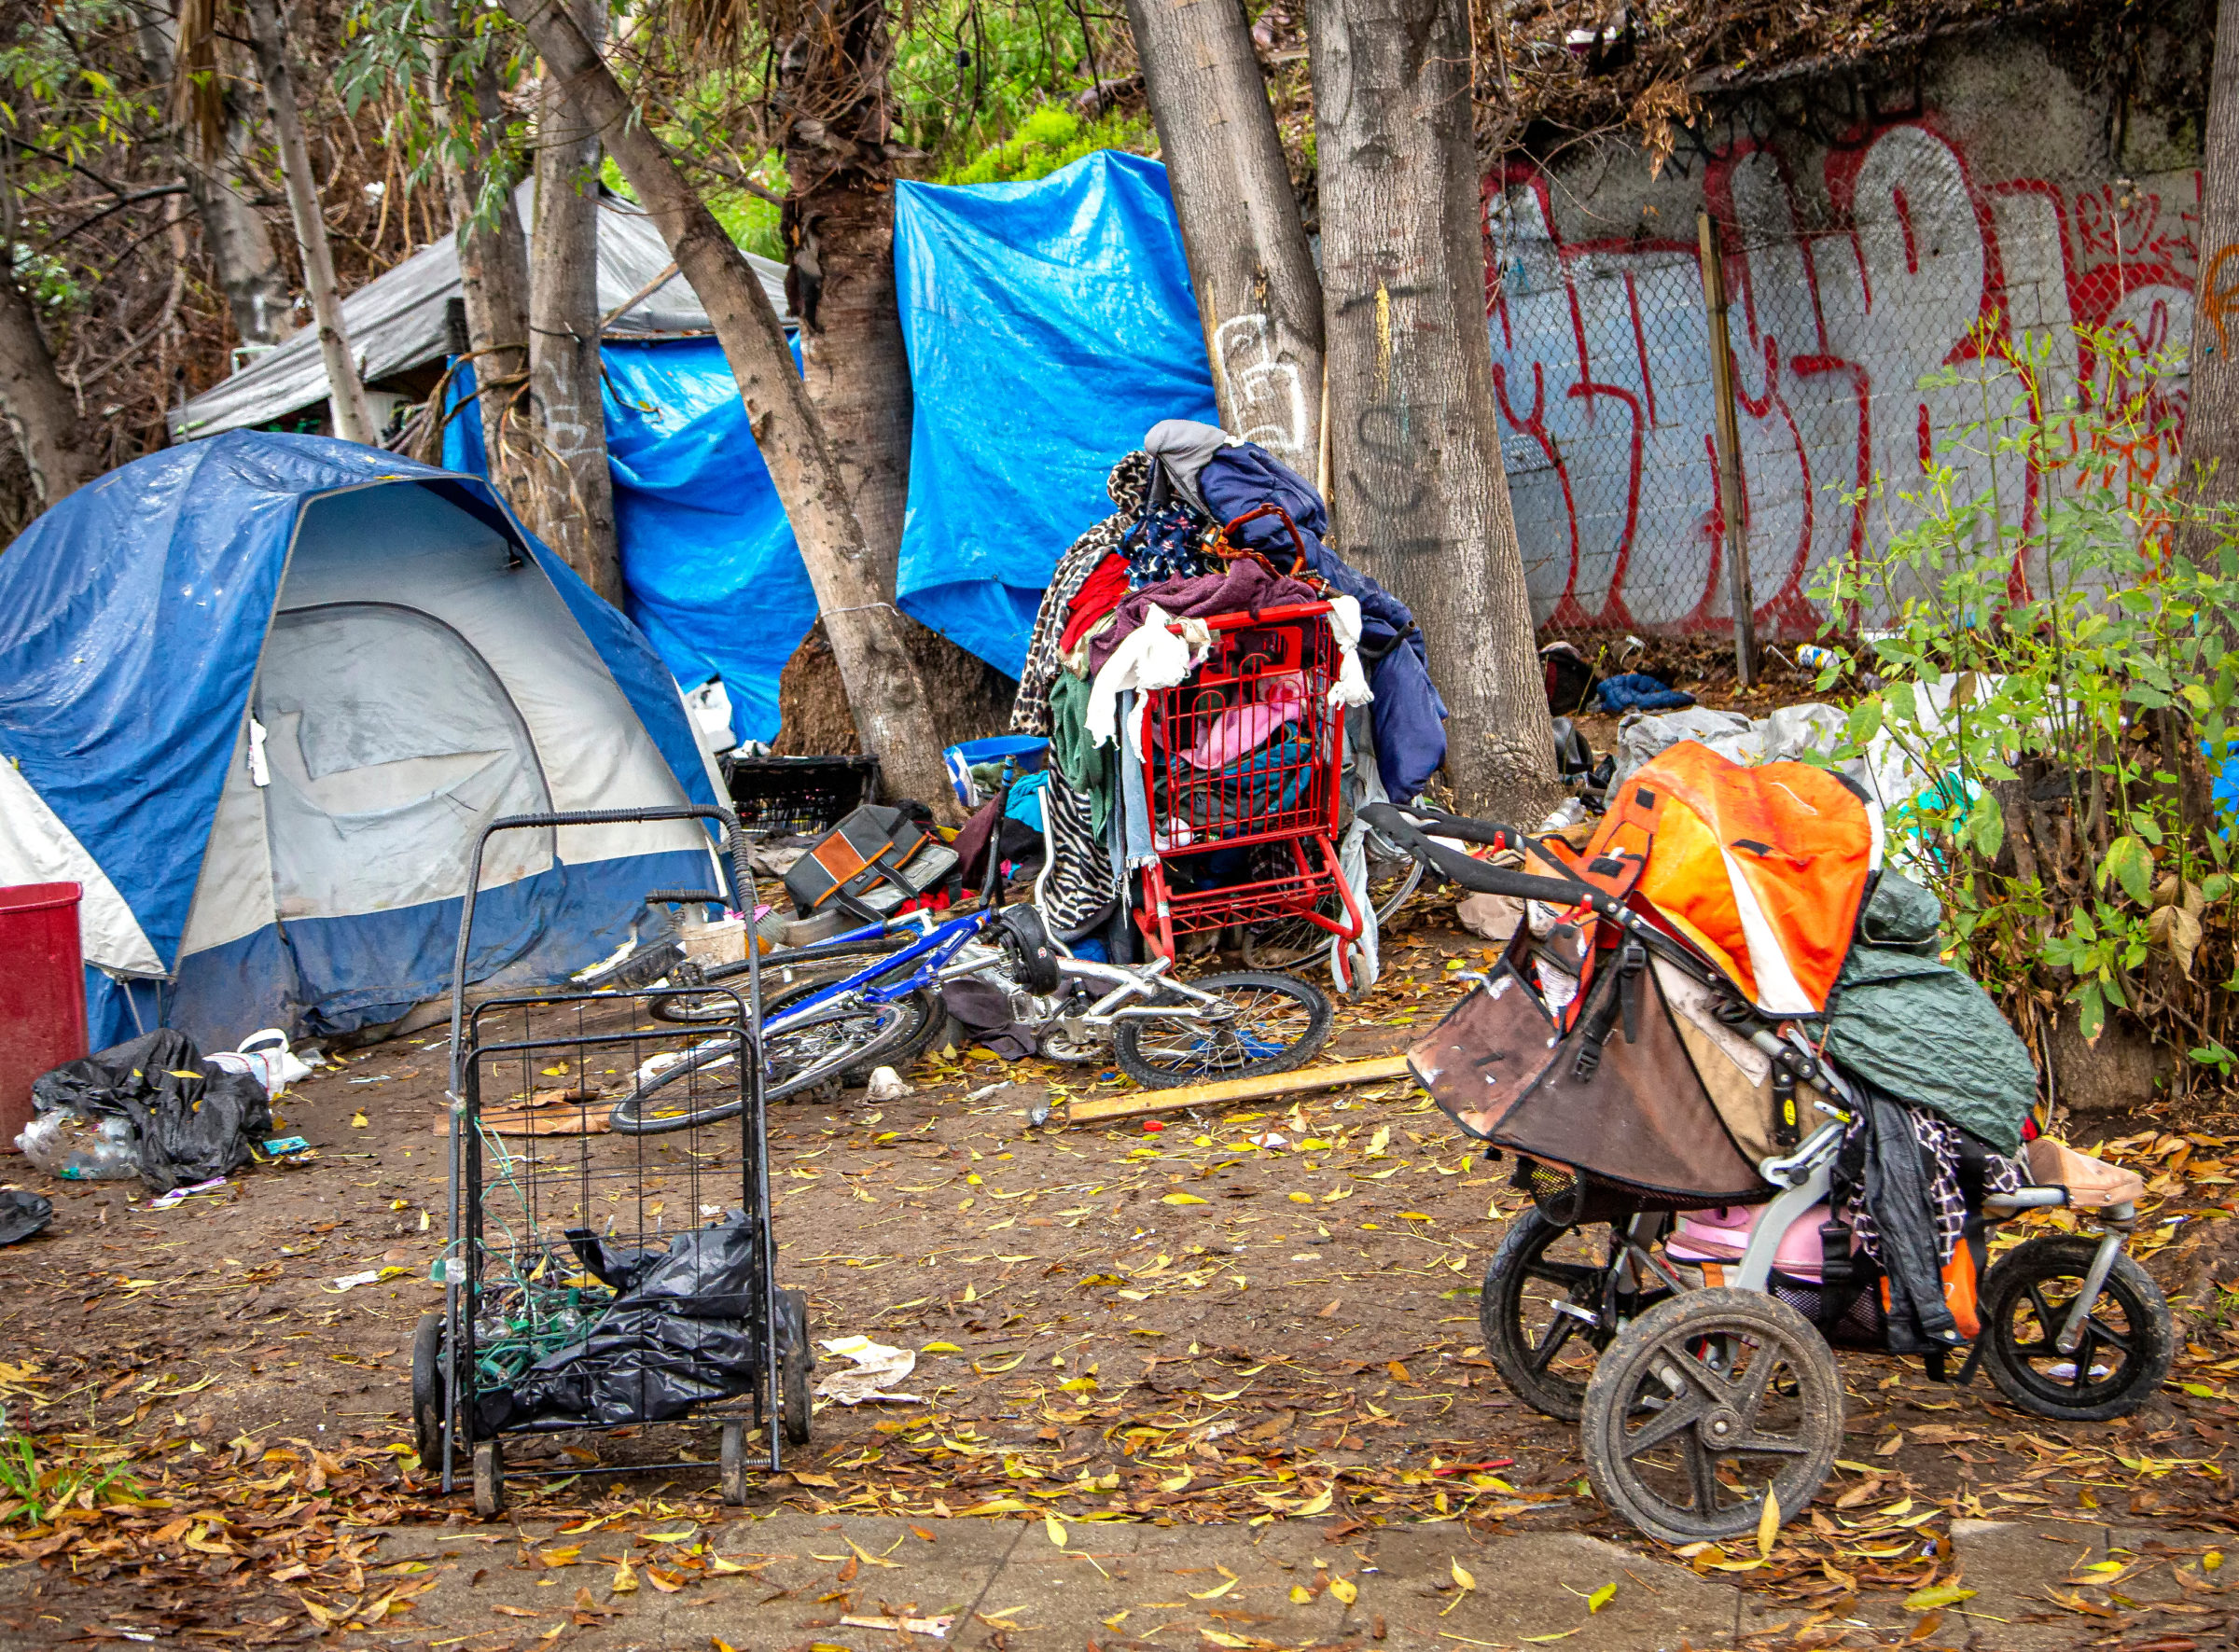 A homeless encampment on the side of a road